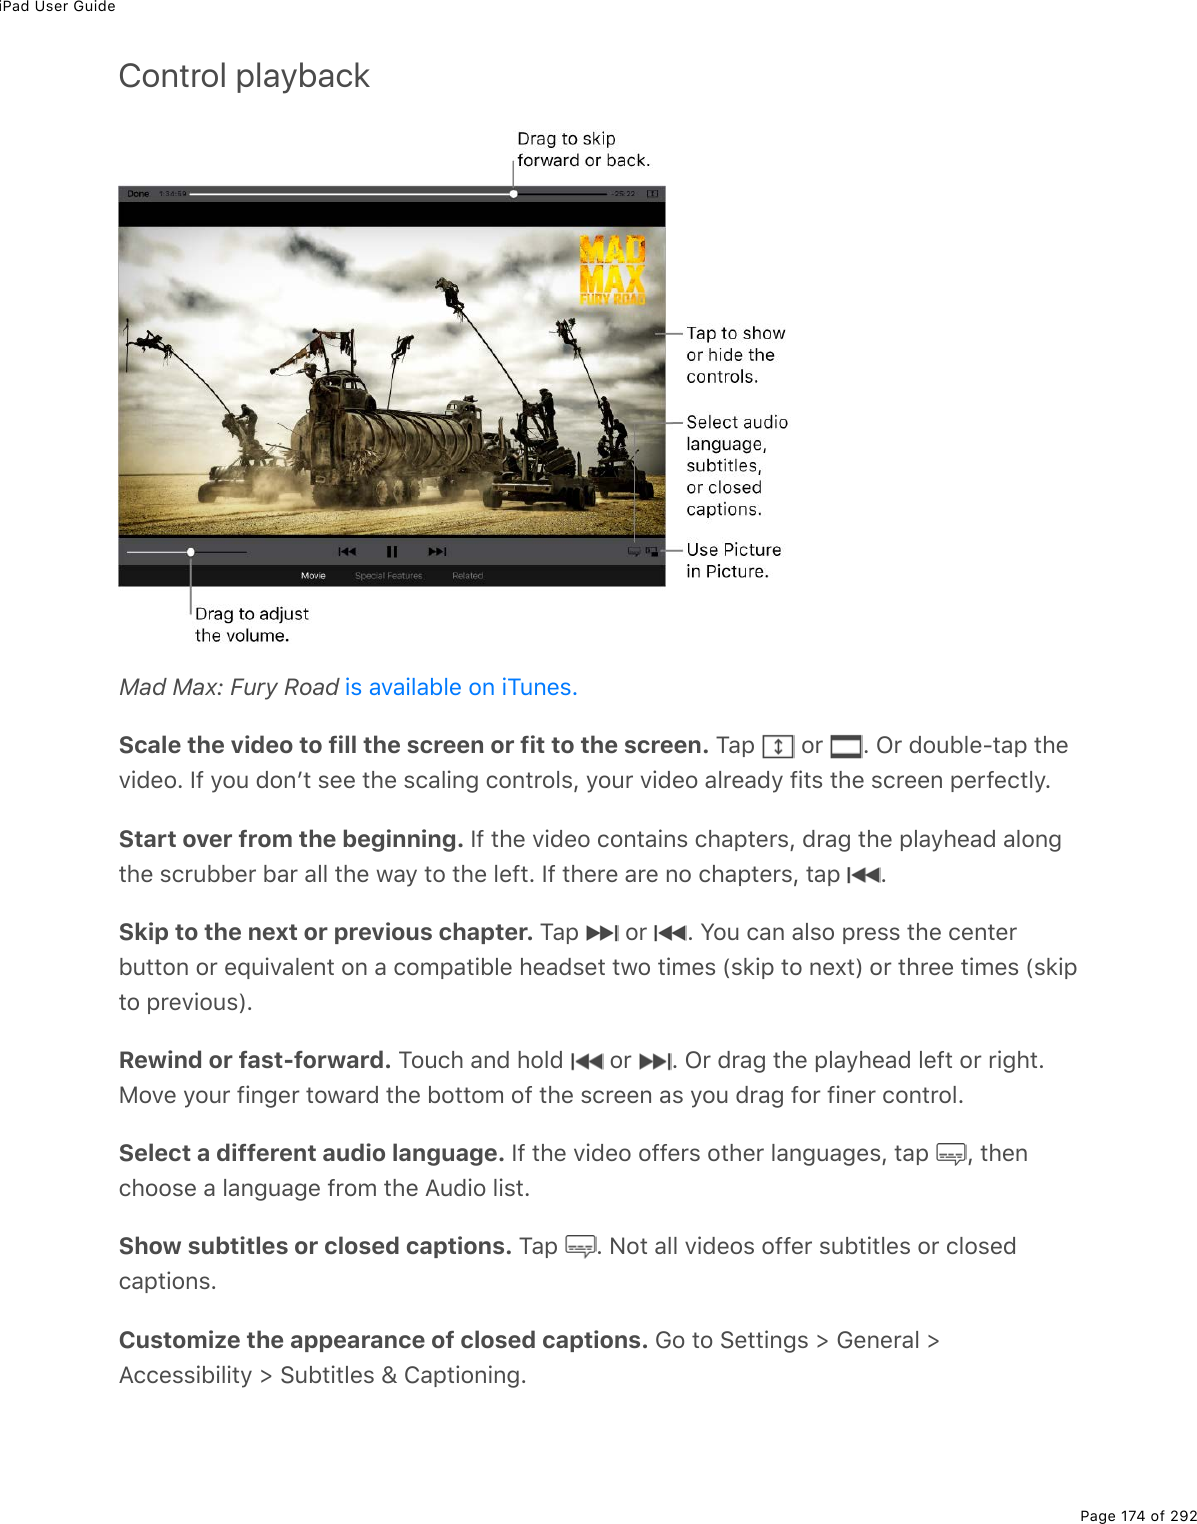 iPad User GuidePage 174 of 292Control playbackMad Max: Fury Road Scale the video to fill the screen or fit to the screen. M#-% %2$% E%G$%72&gt;53(Q&quot;#-%&quot;*(D.7(2E%S9%=2&gt;%720F&quot;%&amp;((%&quot;*(%&amp;)#3.0;%)20&quot;$23&amp;L%=2&gt;$%D.7(2%#3$(#7=%9.&quot;&amp;%&quot;*(%&amp;)$((0%-($9()&quot;3=EStart over from the beginning. S9%&quot;*(%D.7(2%)20&quot;#.0&amp;%)*#-&quot;($&amp;L%7$#;%&quot;*(%-3#=*(#7%#320;&quot;*(%&amp;)$&gt;55($%5#$%#33%&quot;*(%1#=%&quot;2%&quot;*(%3(9&quot;E%S9%&quot;*($(%#$(%02%)*#-&quot;($&amp;L%&quot;#-% ESkip to the next or previous chapter. M#-% %2$% E%Y2&gt;%)#0%#3&amp;2%-$(&amp;&amp;%&quot;*(%)(0&quot;($5&gt;&quot;&quot;20%2$%(]&gt;.D#3(0&quot;%20%#%)2/-#&quot;.53(%*(#7&amp;(&quot;%&quot;12%&quot;./(&amp;%W&amp;&apos;.-%&quot;2%0(,&quot;X%2$%&quot;*$((%&quot;./(&amp;%W&amp;&apos;.-&quot;2%-$(D.2&gt;&amp;XERewind or fast-forward. M2&gt;)*%#07%*237% %2$% E%G$%7$#;%&quot;*(%-3#=*(#7%3(9&quot;%2$%$.;*&quot;E82D(%=2&gt;$%9.0;($%&quot;21#$7%&quot;*(%52&quot;&quot;2/%29%&quot;*(%&amp;)$((0%#&amp;%=2&gt;%7$#;%92$%9.0($%)20&quot;$23ESelect a different audio language. S9%&quot;*(%D.7(2%299($&amp;%2&quot;*($%3#0;&gt;#;(&amp;L%&quot;#-% L%&quot;*(0)*22&amp;(%#%3#0;&gt;#;(%9$2/%&quot;*(%?&gt;7.2%3.&amp;&quot;EShow subtitles or closed captions. M#-% E%C2&quot;%#33%D.7(2&amp;%299($%&amp;&gt;5&quot;.&quot;3(&amp;%2$%)32&amp;(7)#-&quot;.20&amp;ECustomize the appearance of closed captions. 62%&quot;2%!(&quot;&quot;.0;&amp;%[%6(0($#3%[?))(&amp;&amp;.5.3.&quot;=%[%!&gt;5&quot;.&quot;3(&amp;%\%4#-&quot;.20.0;E.&amp;%#D#.3#53(%20%.M&gt;0(&amp;E